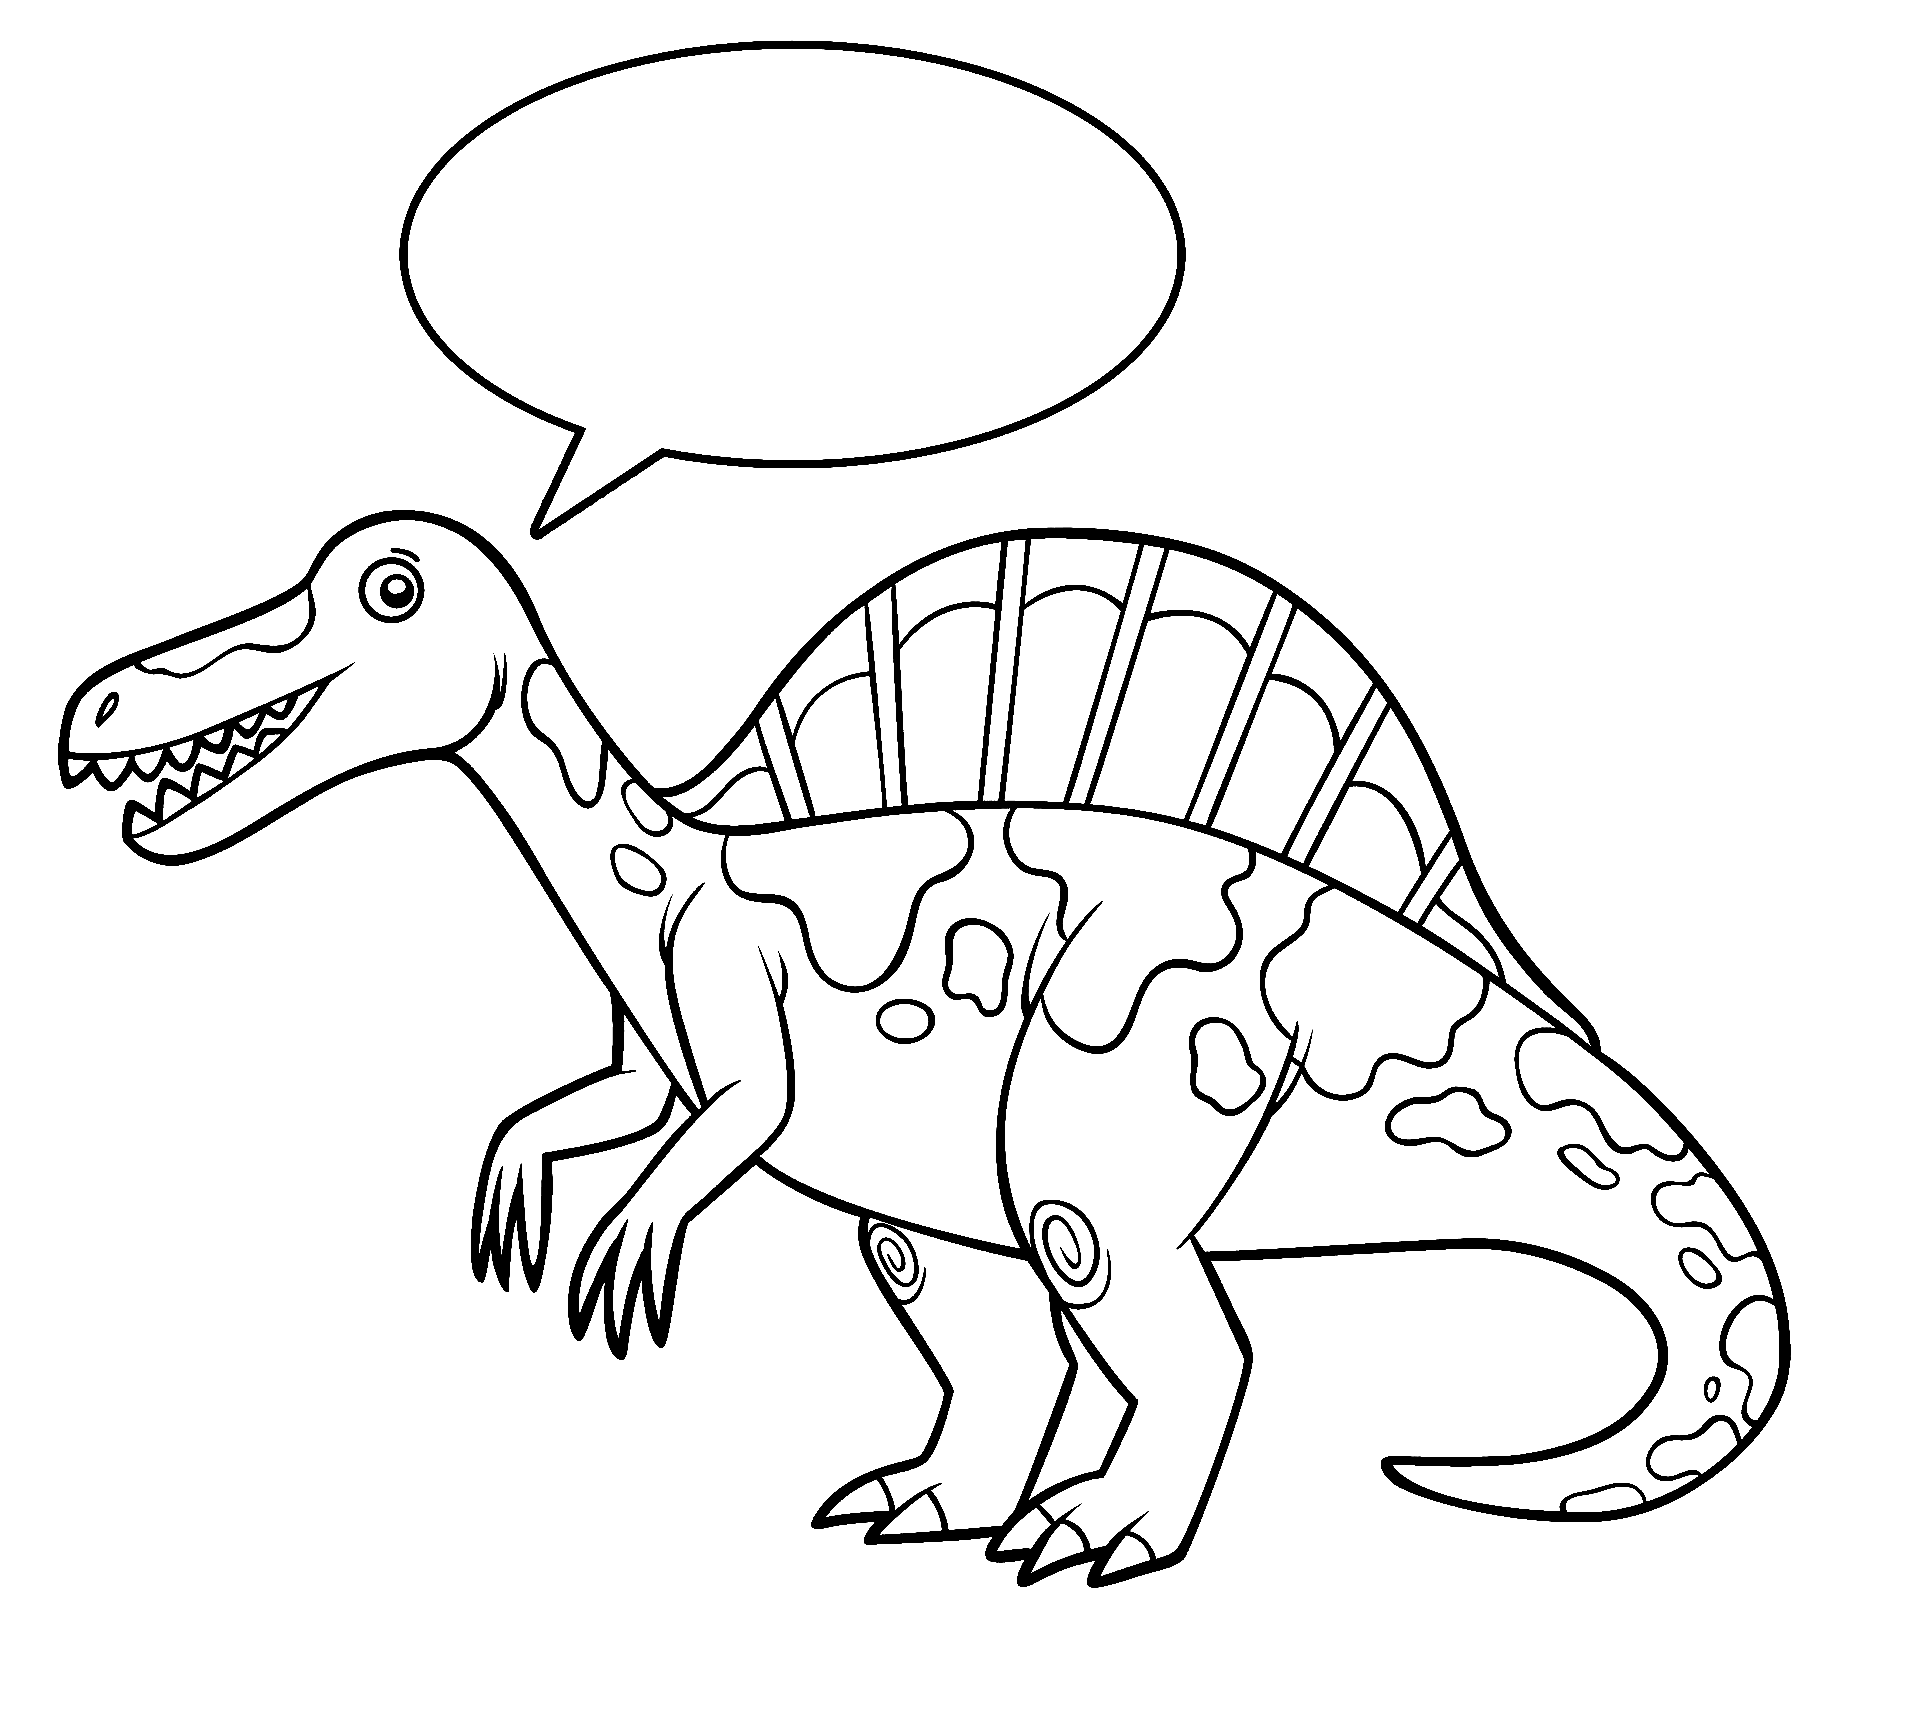 Unique Spinosaurus Coloring Pages